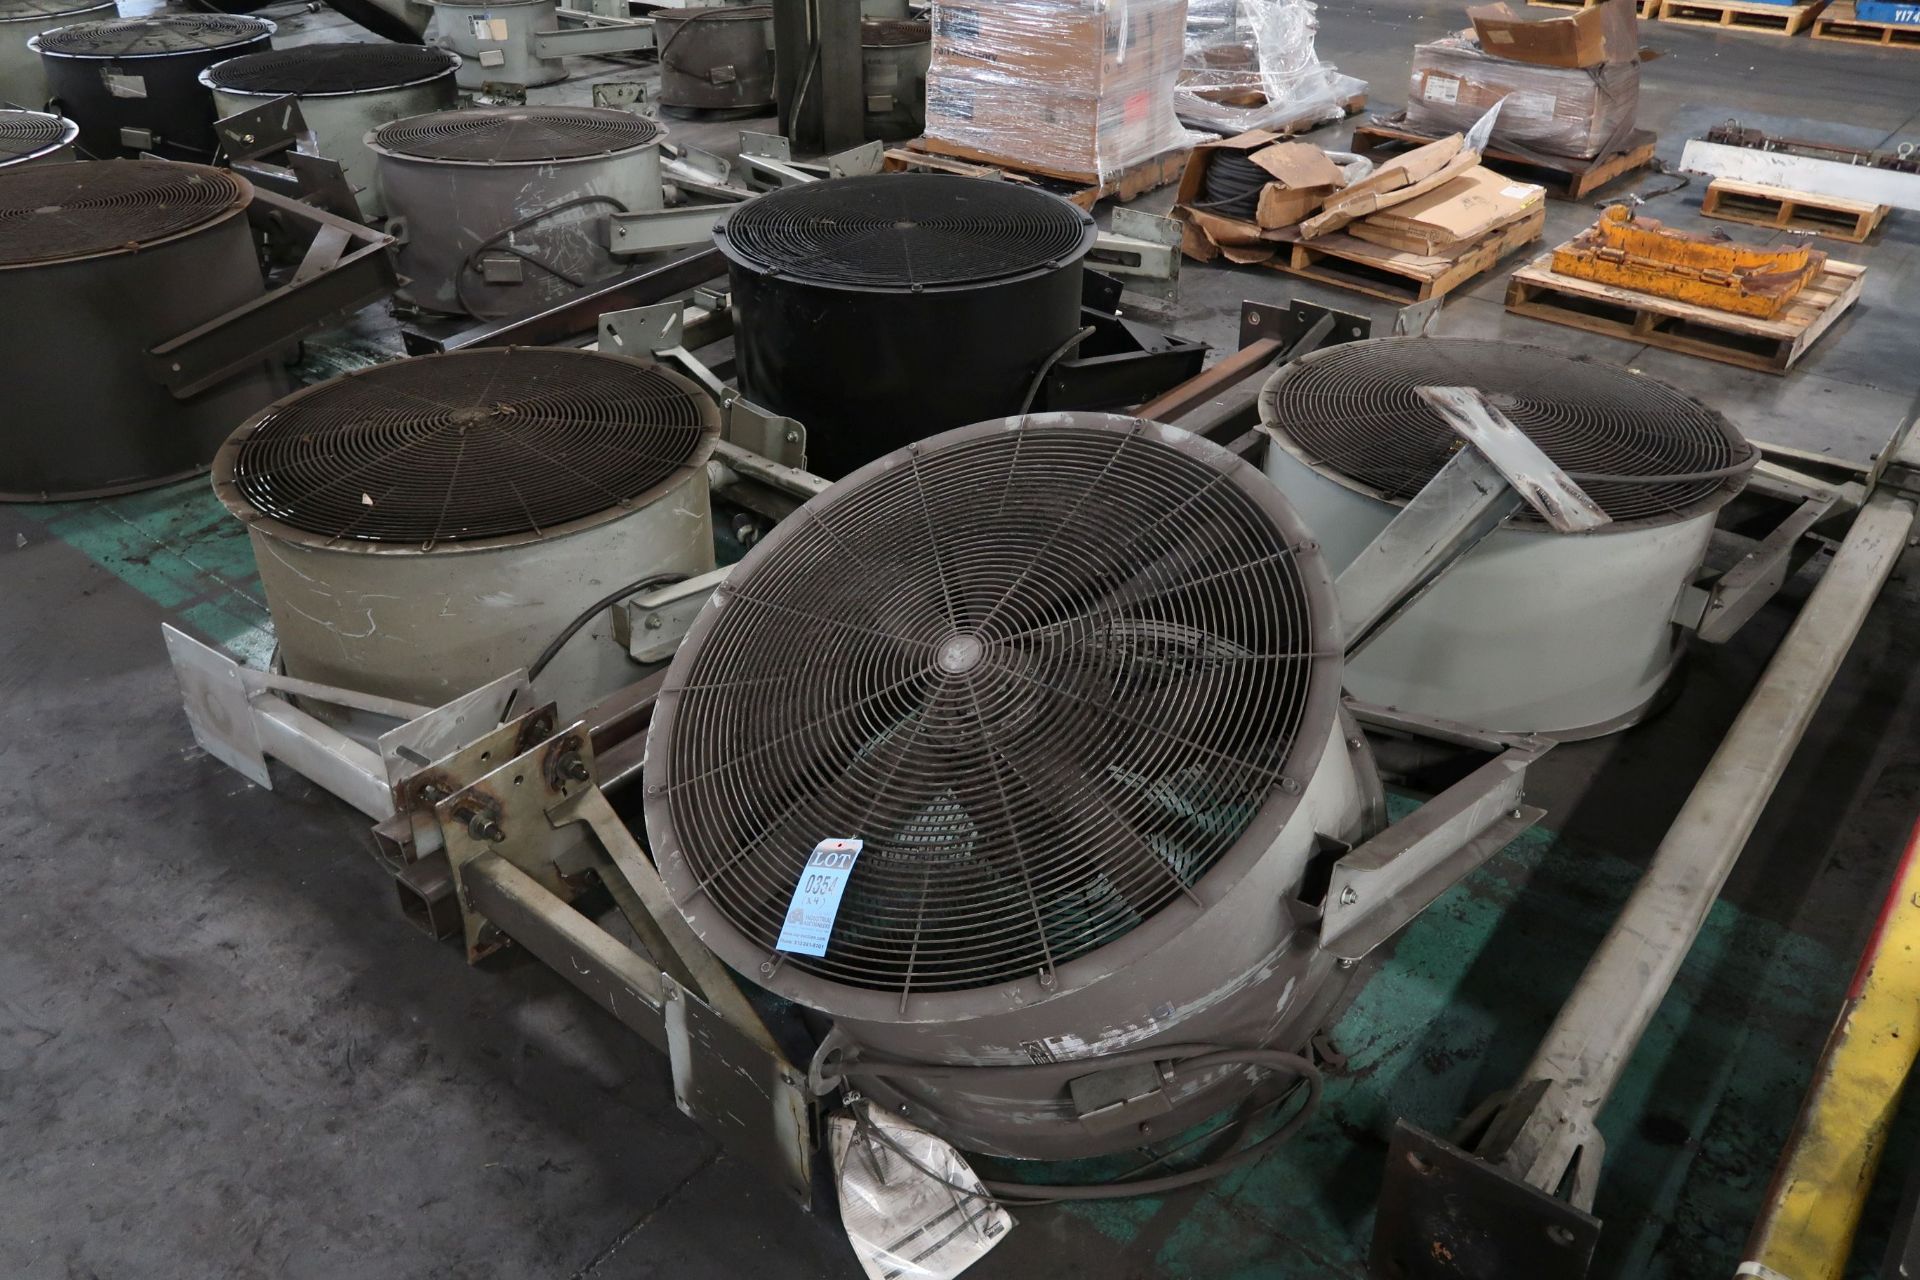 CIRCULAR FANS WITH FLOOR POSTS AND MOUNTING **LOADING PRICE DUE TO ERRA - $50.00**